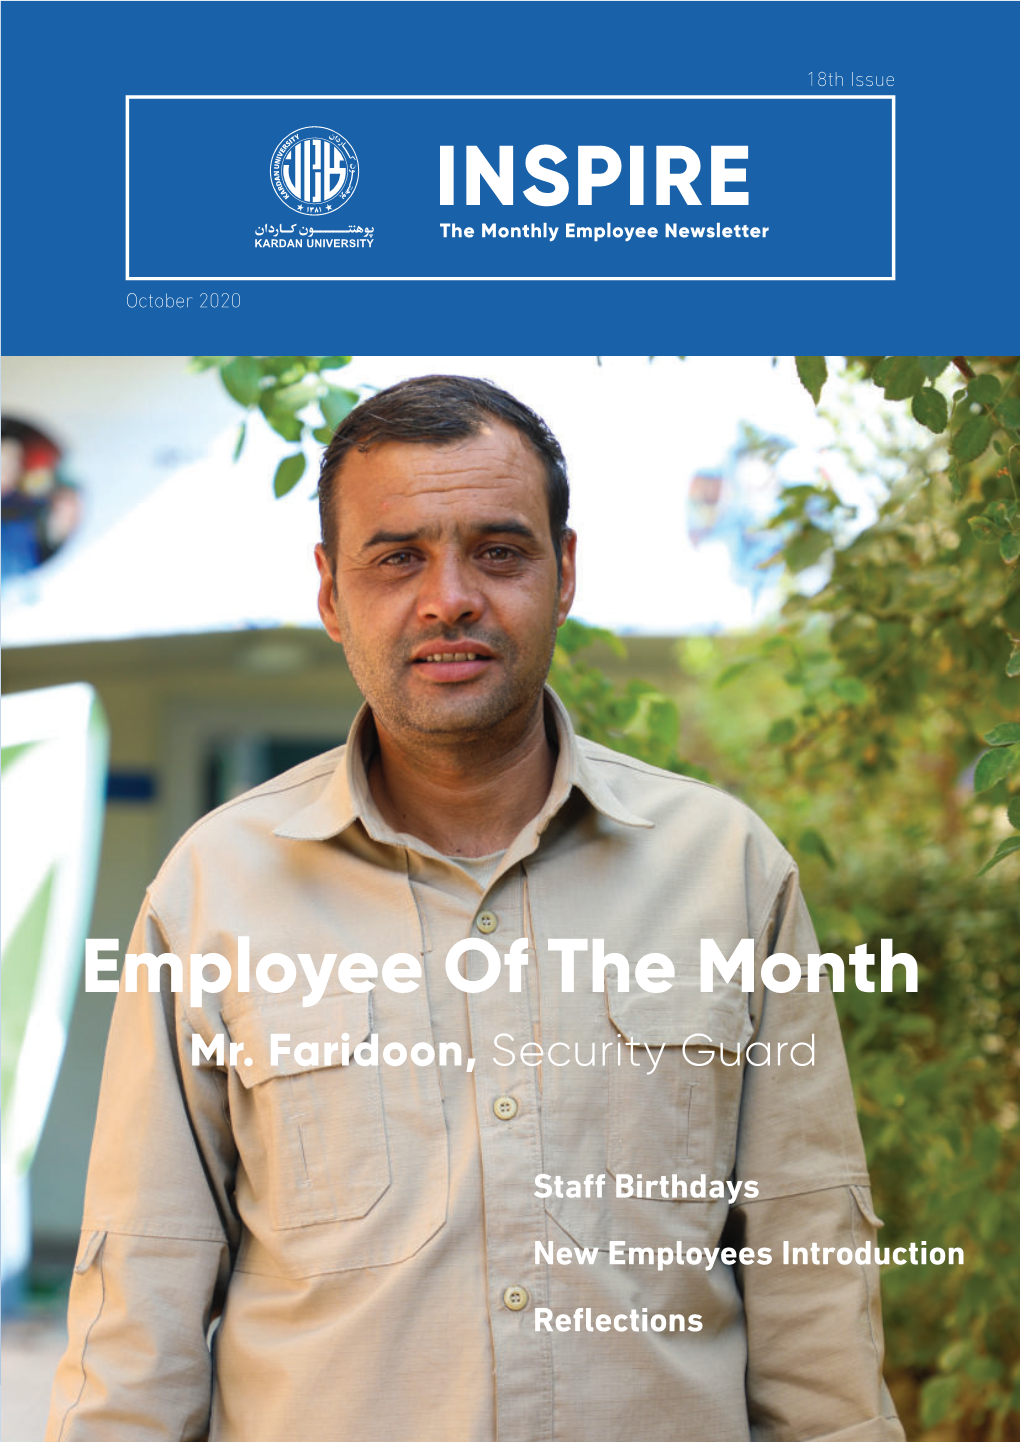 INSPIRE the Monthly Employee Newsletter